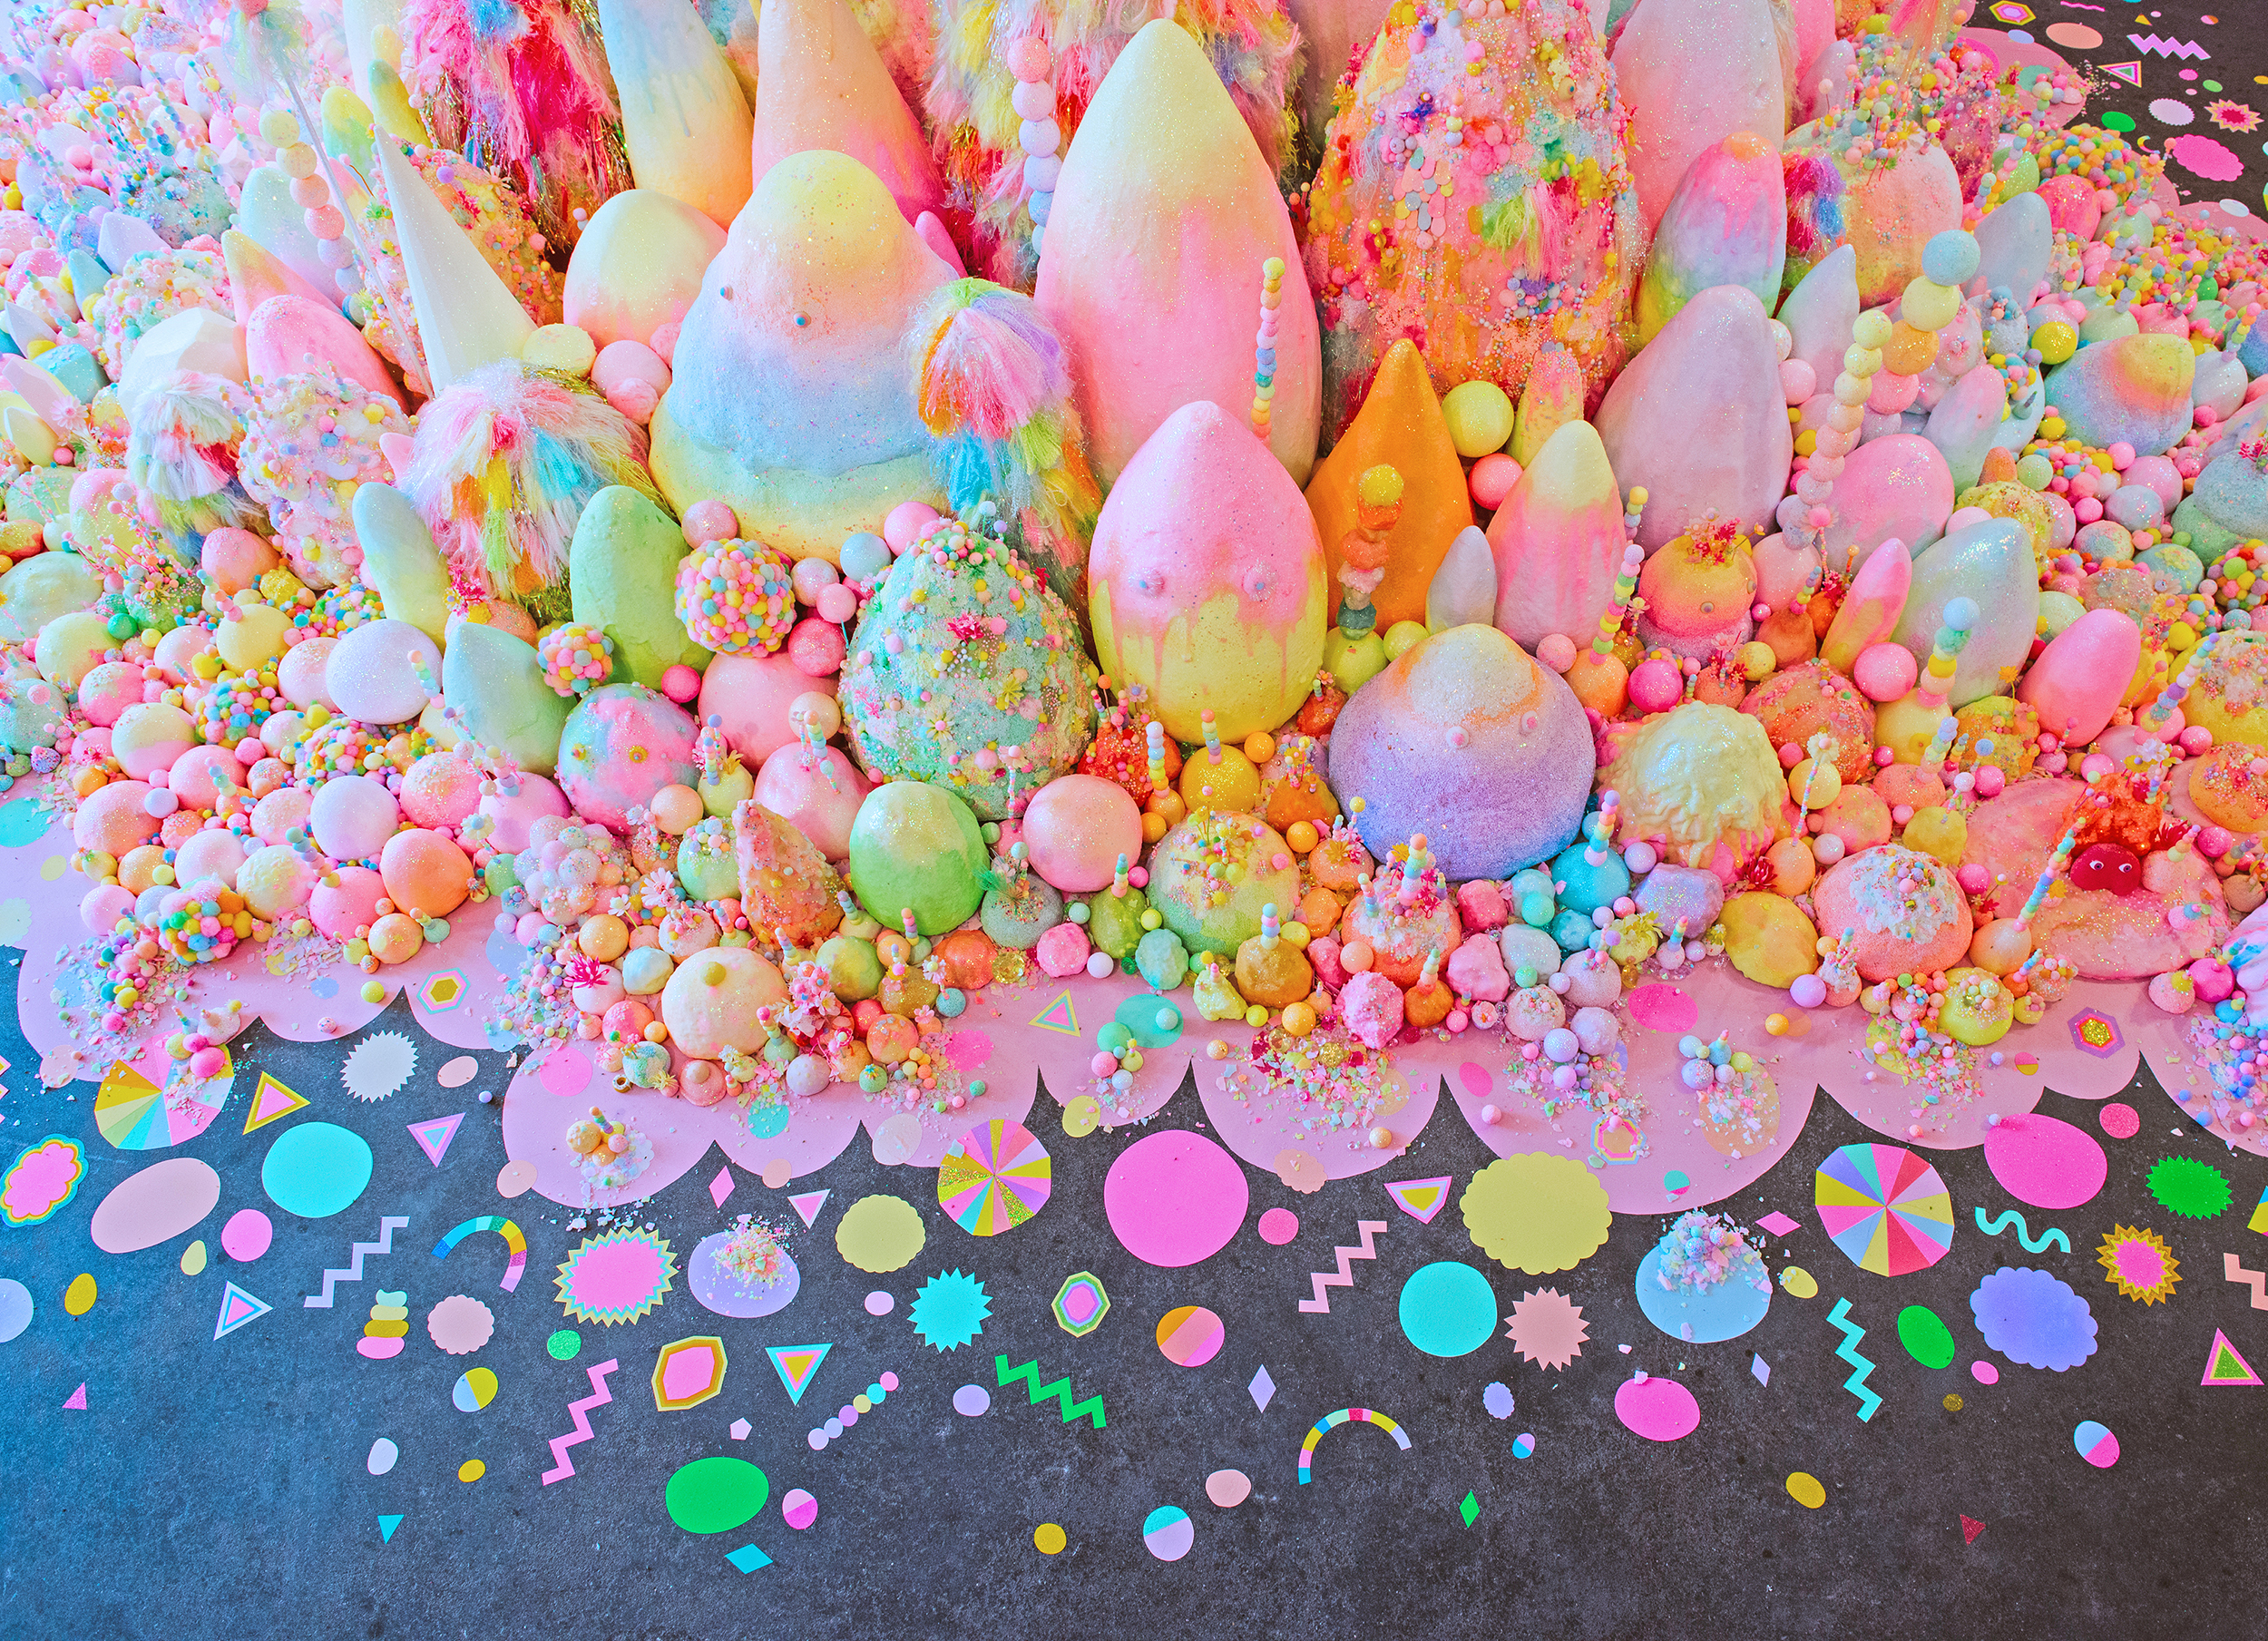 A colorful installation of candy-like sugar and mixed-media sculptures.